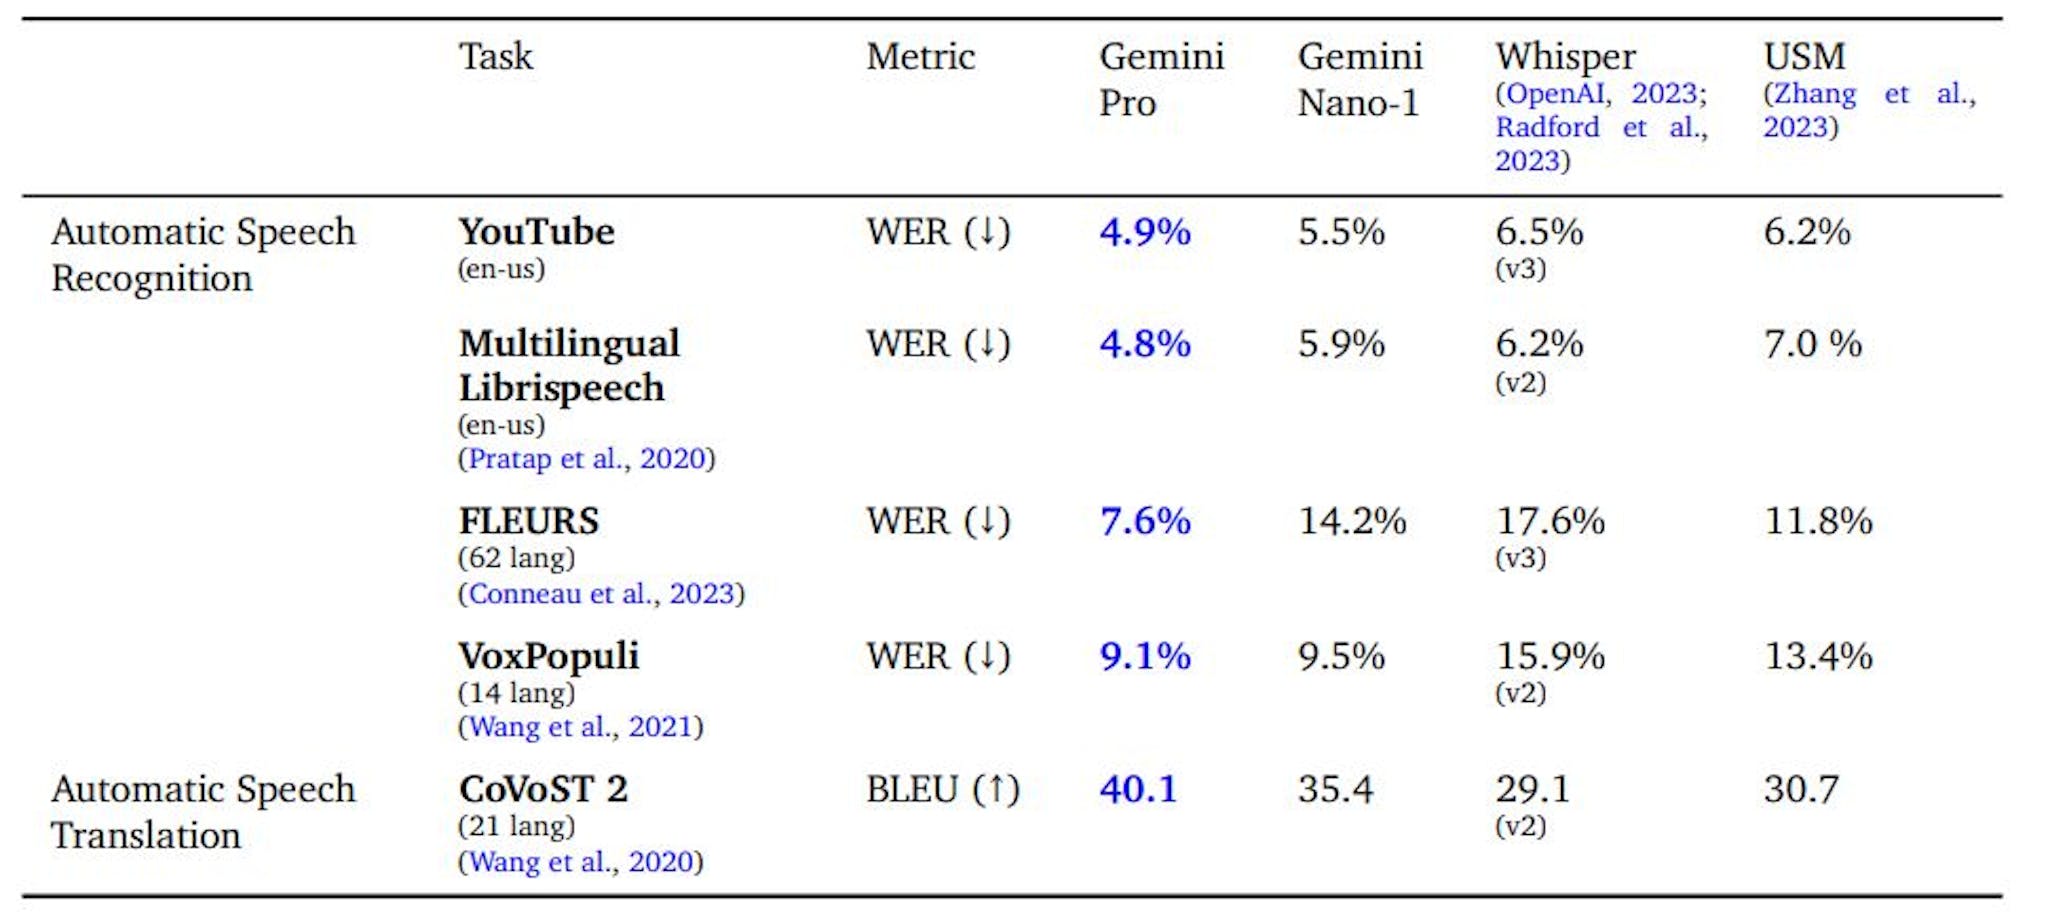 Table 11 | Speech evaluation results on selected benchmarks for ASR and AST. For ASR, the reported metric is WER where lower is better. For AST, the reported metric is BLEU where higher is better.